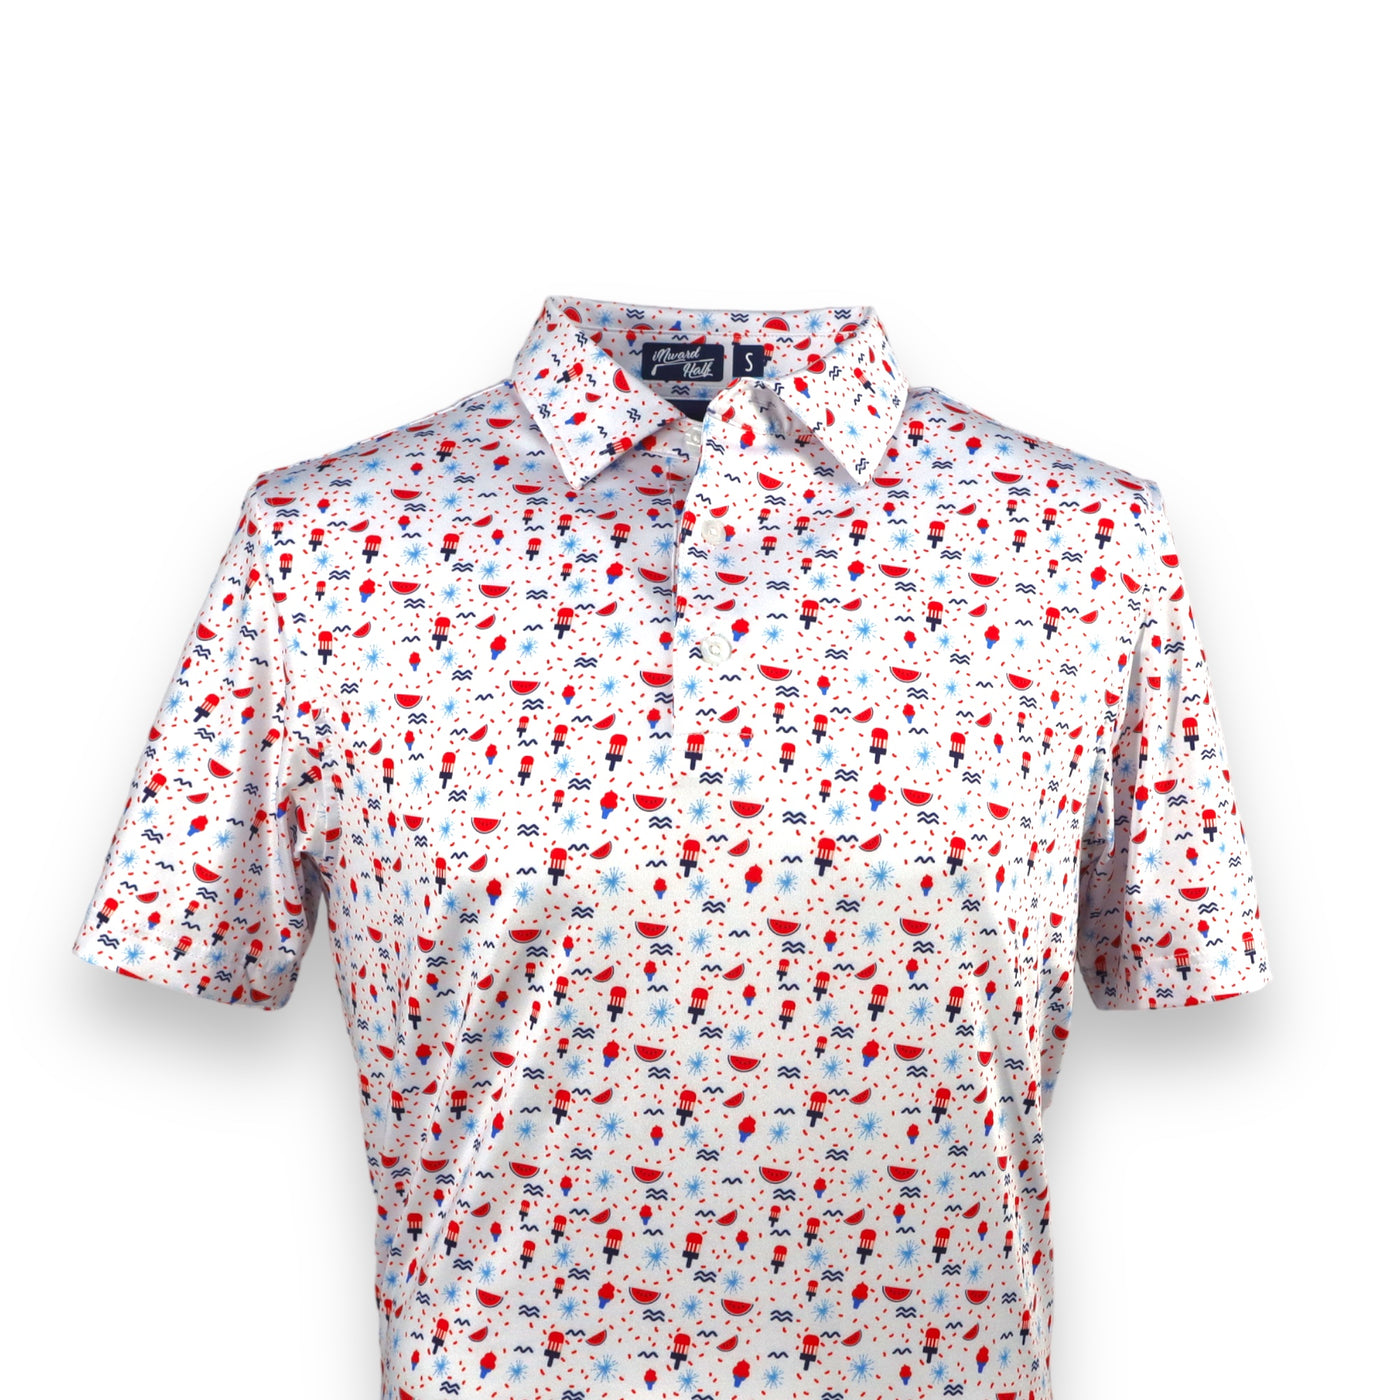 The Firework Pattern Performance Polo